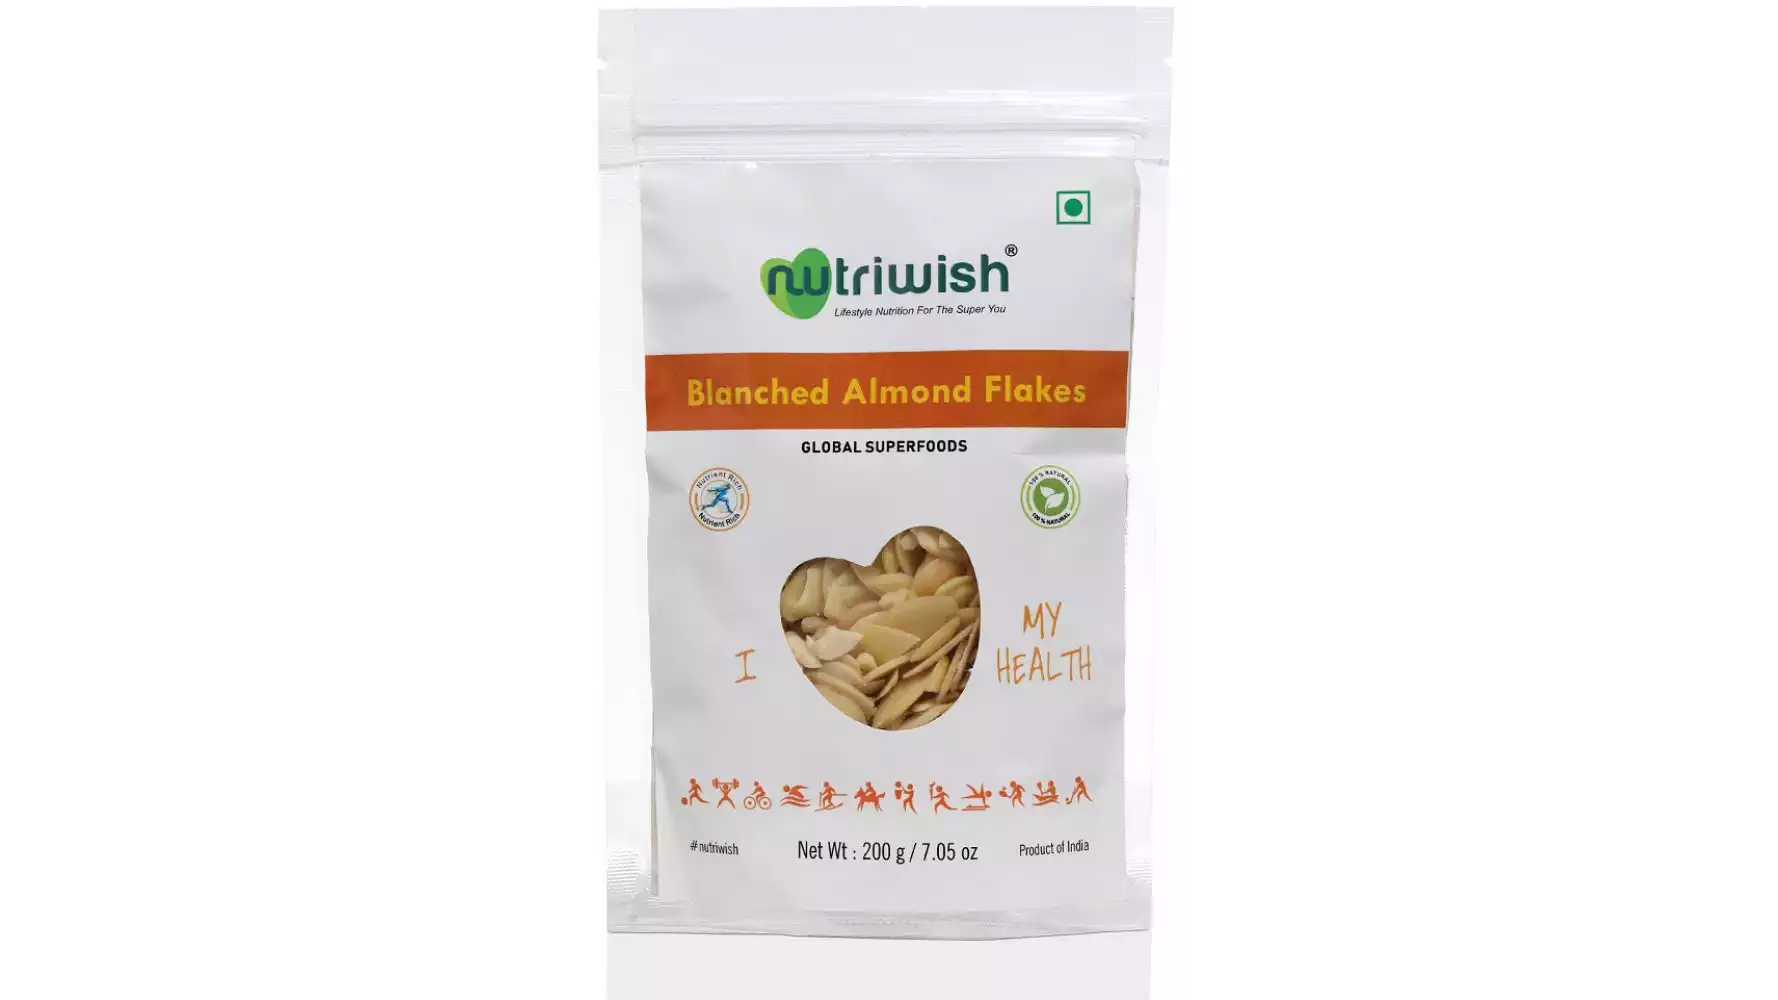 Nutriwish Blanched Almond Flakes (200g)